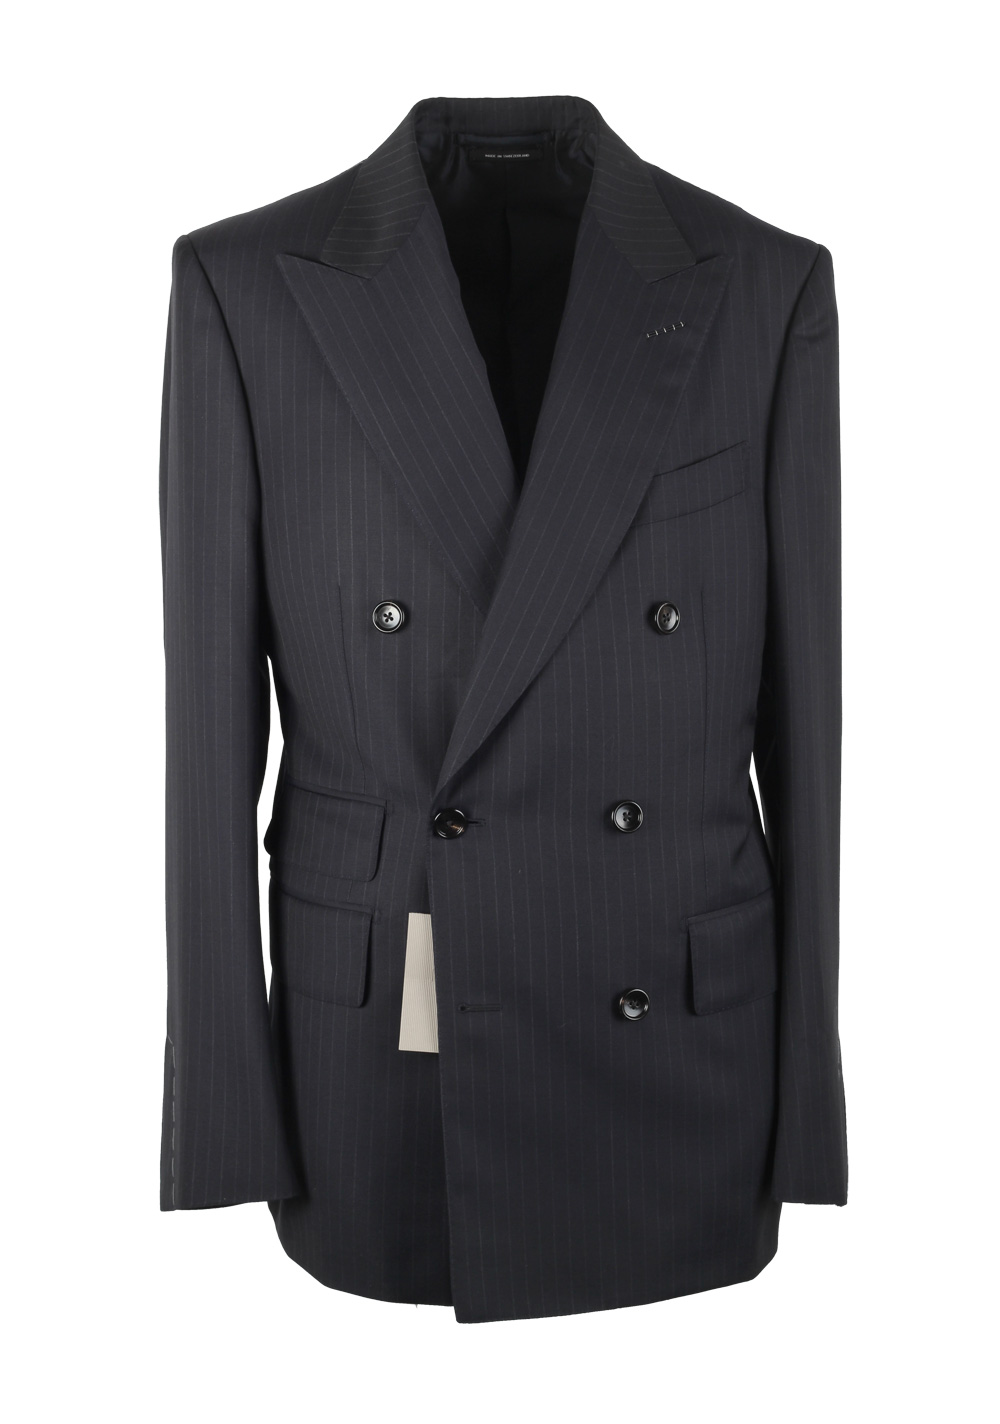 TOM FORD Shelton Blue Striped Double Breasted Suit Size 48 / 38R U.S ...